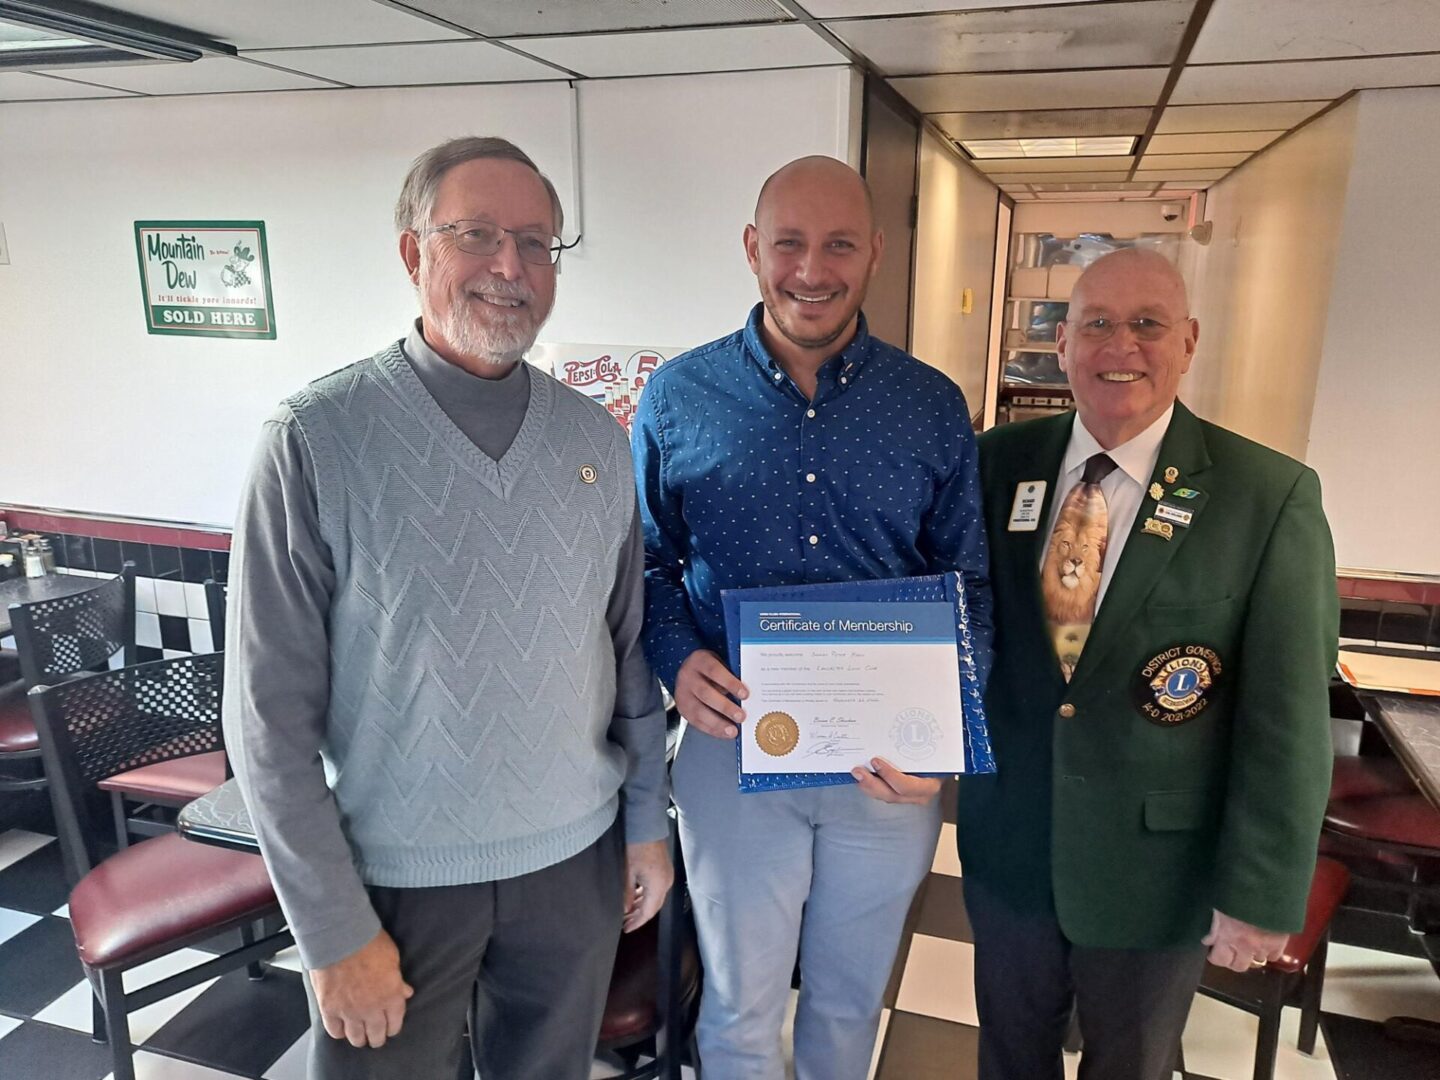 Two men Handing Over a Certification to a Man